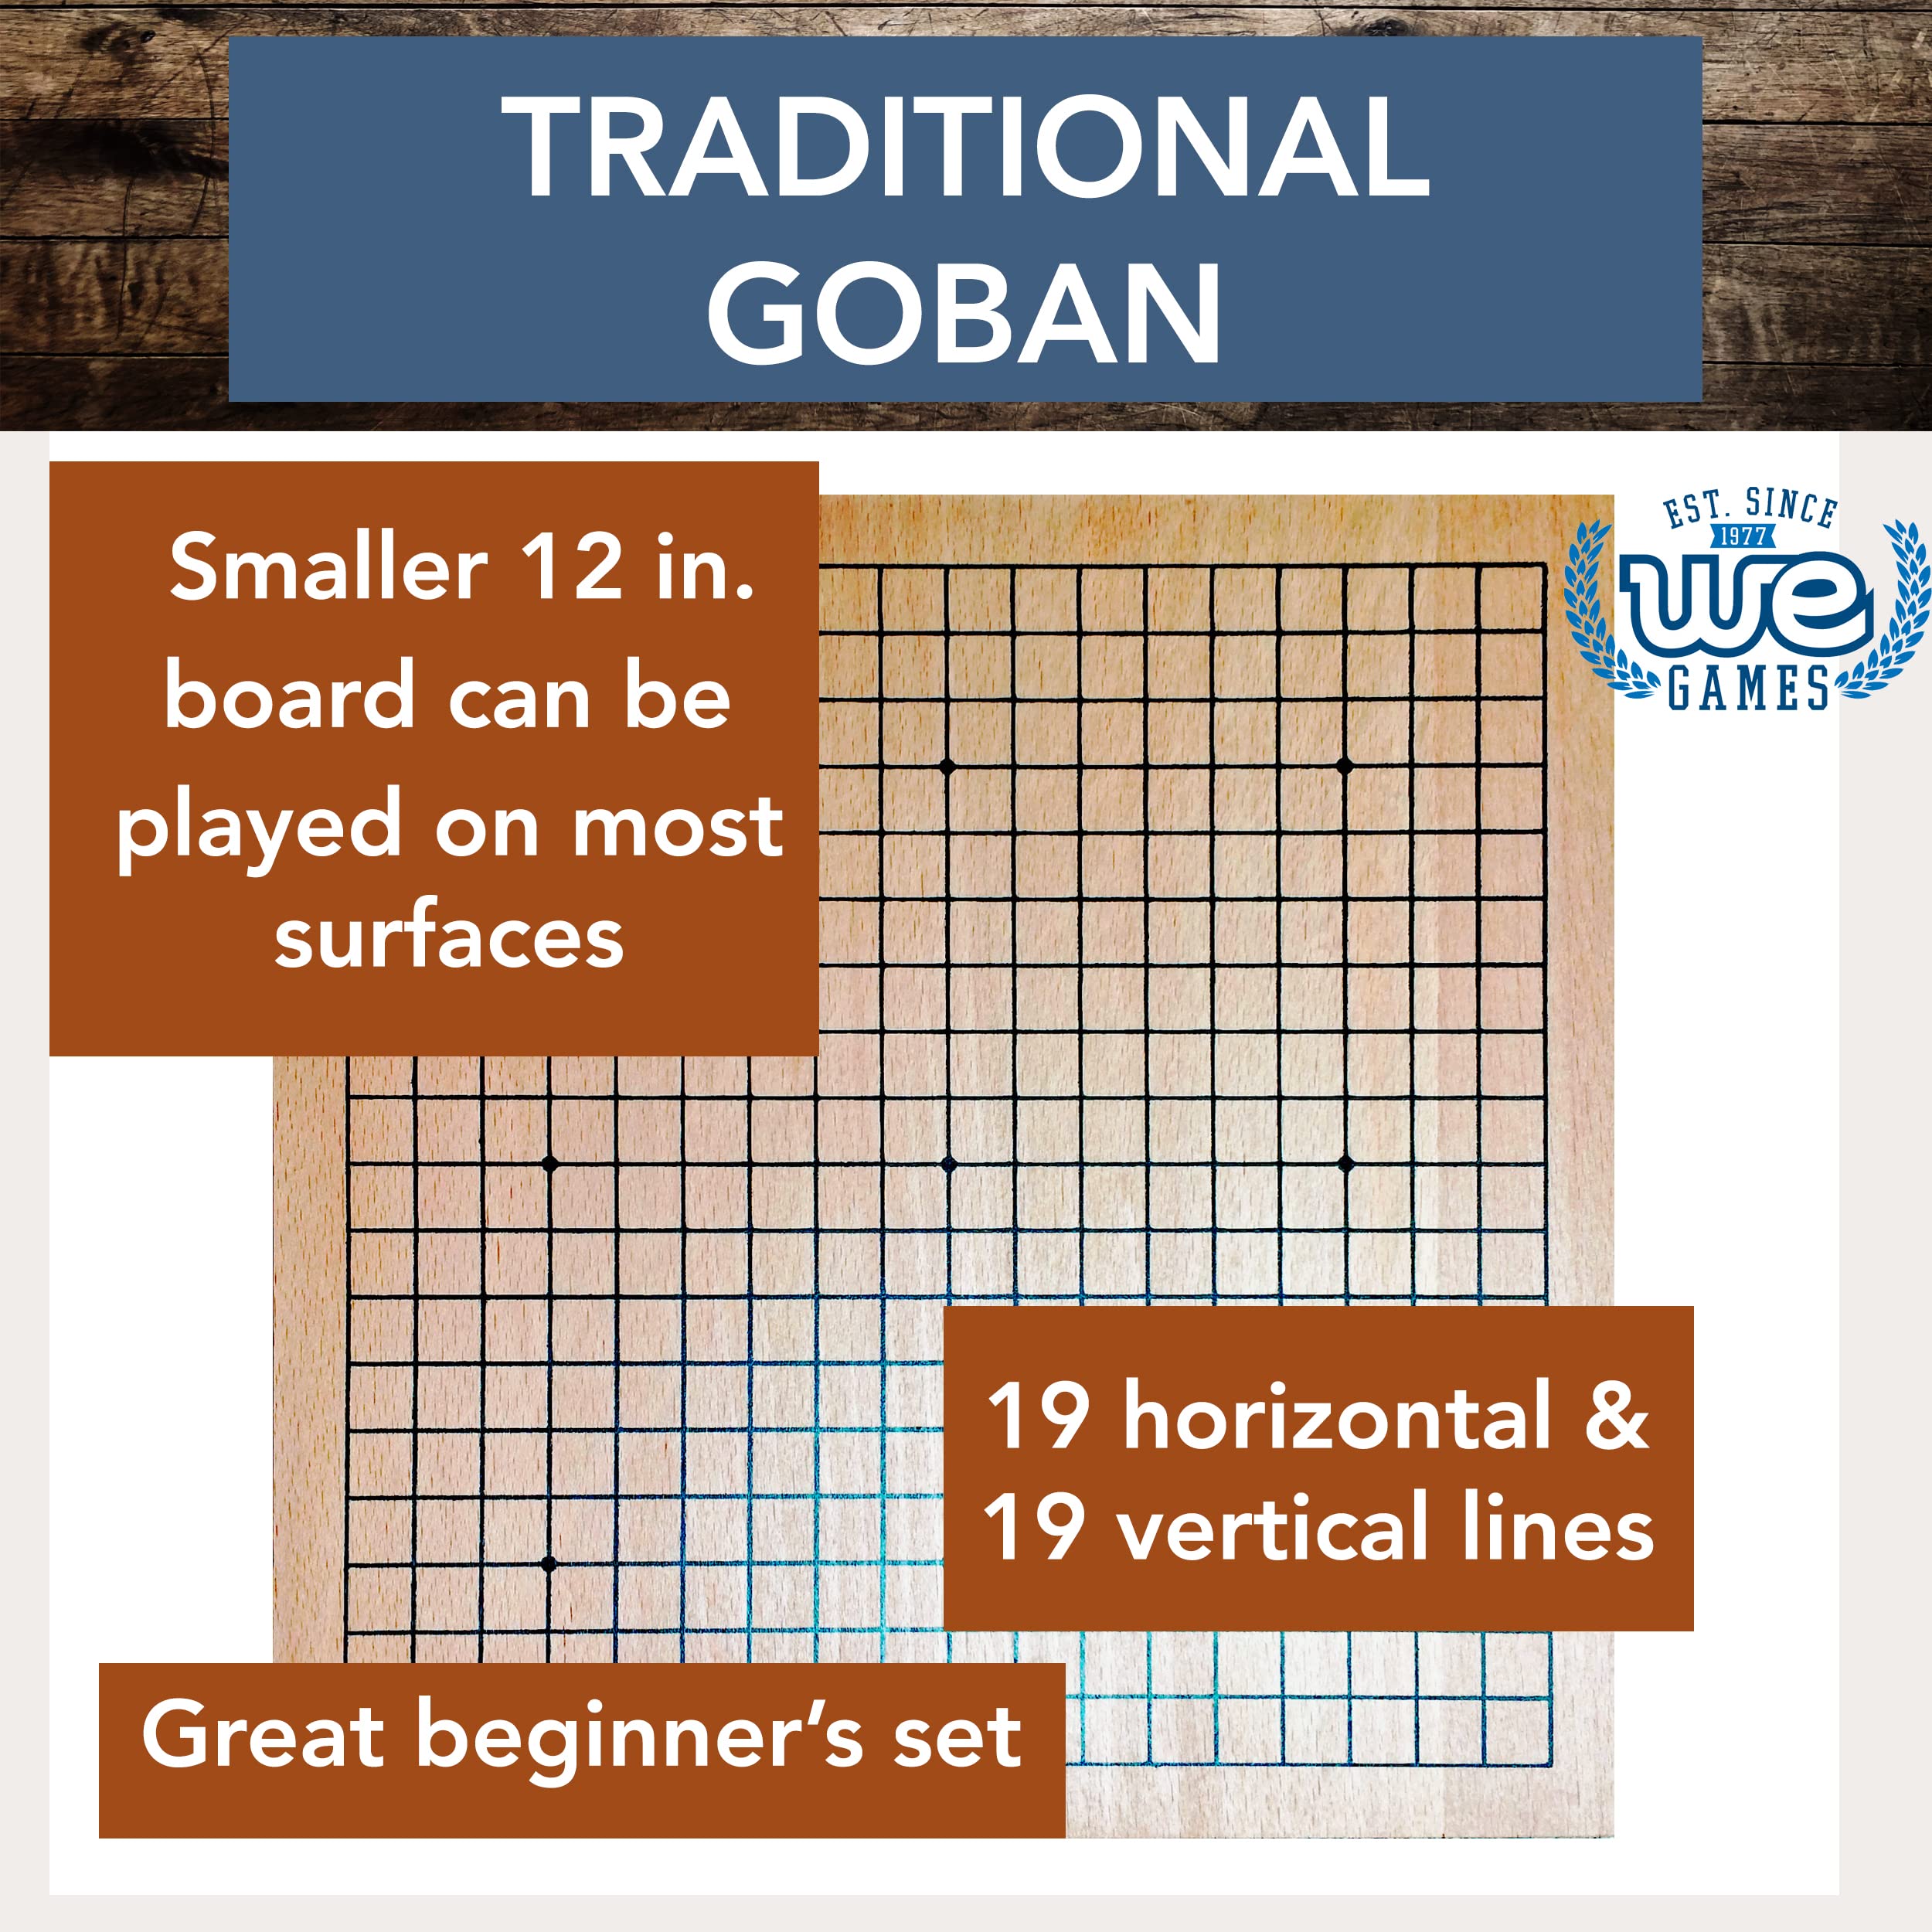 WE Games Wooden GO Board Game Set with Storage Drawers, Classic Goban 2 Player Tabletop Game, Chinese Chess Strategy Game for Kids and Families, Includes Single Convex GO Stones, Durable Natual WoodÊ